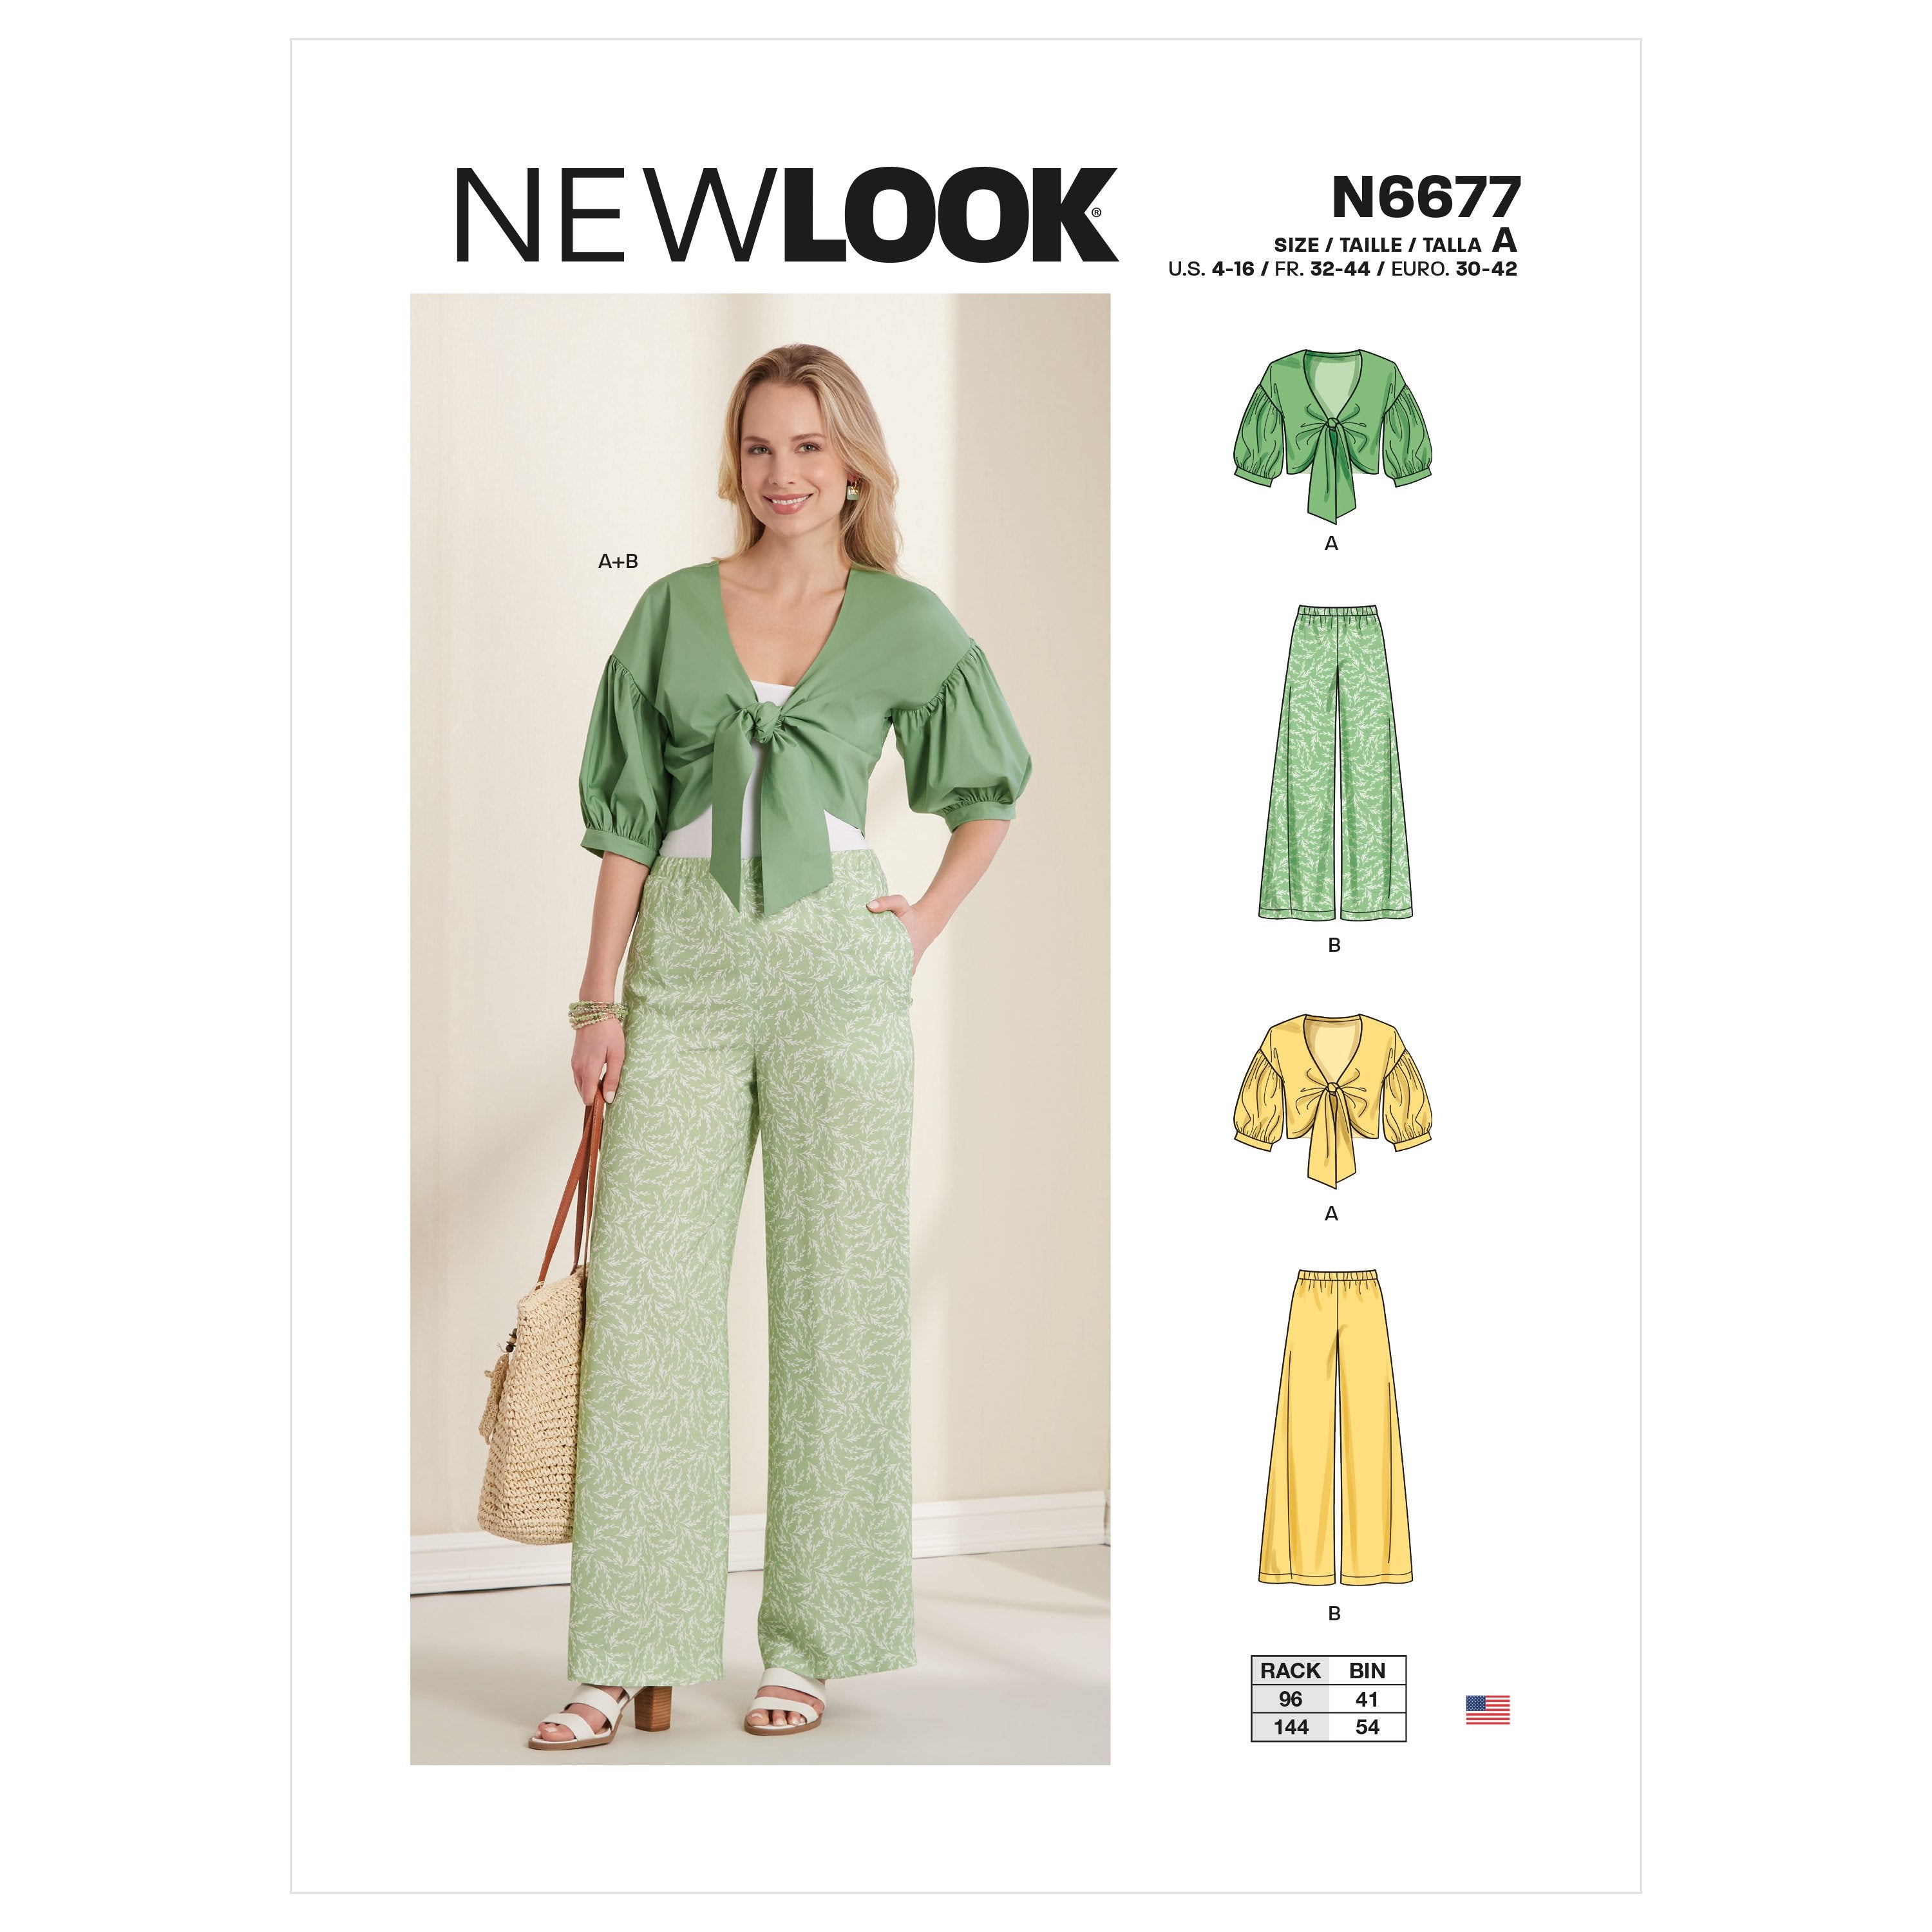 New Look Sewing Pattern 6677 Misses' Cropped Jacket and Trousers 